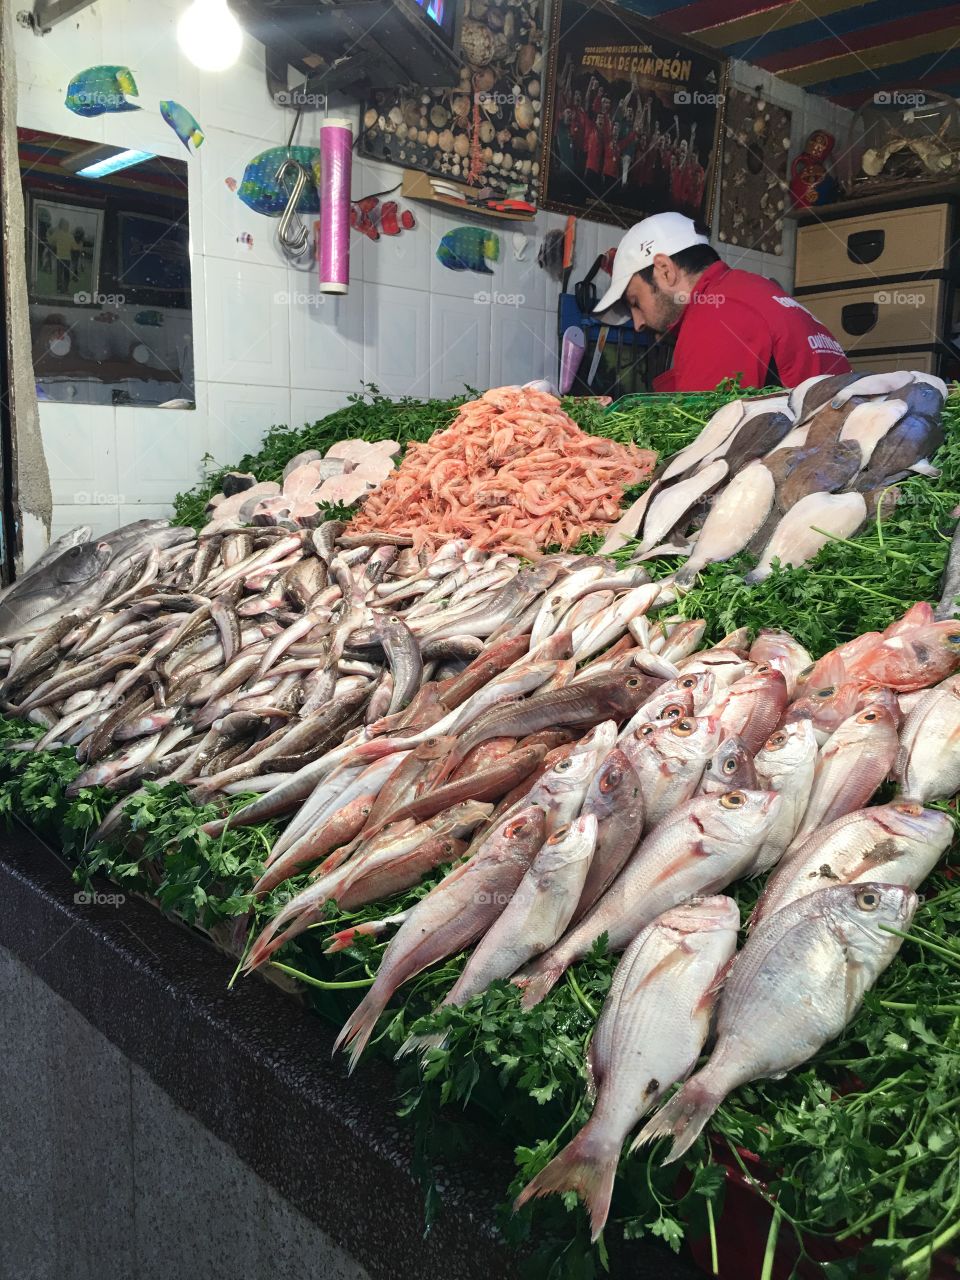 Morocco 🇲🇦 : Selling fish at the market